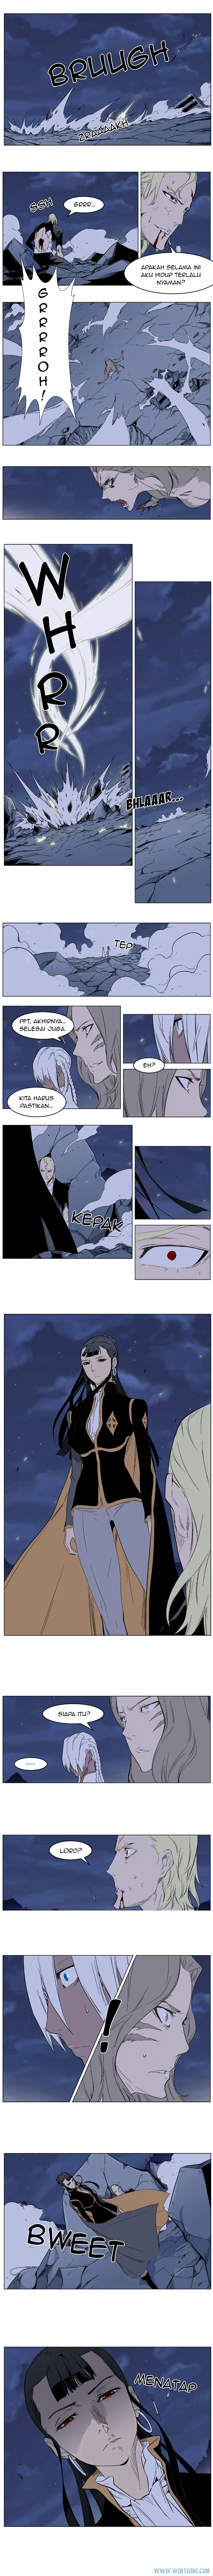 Noblesse Chapter 320 - 23